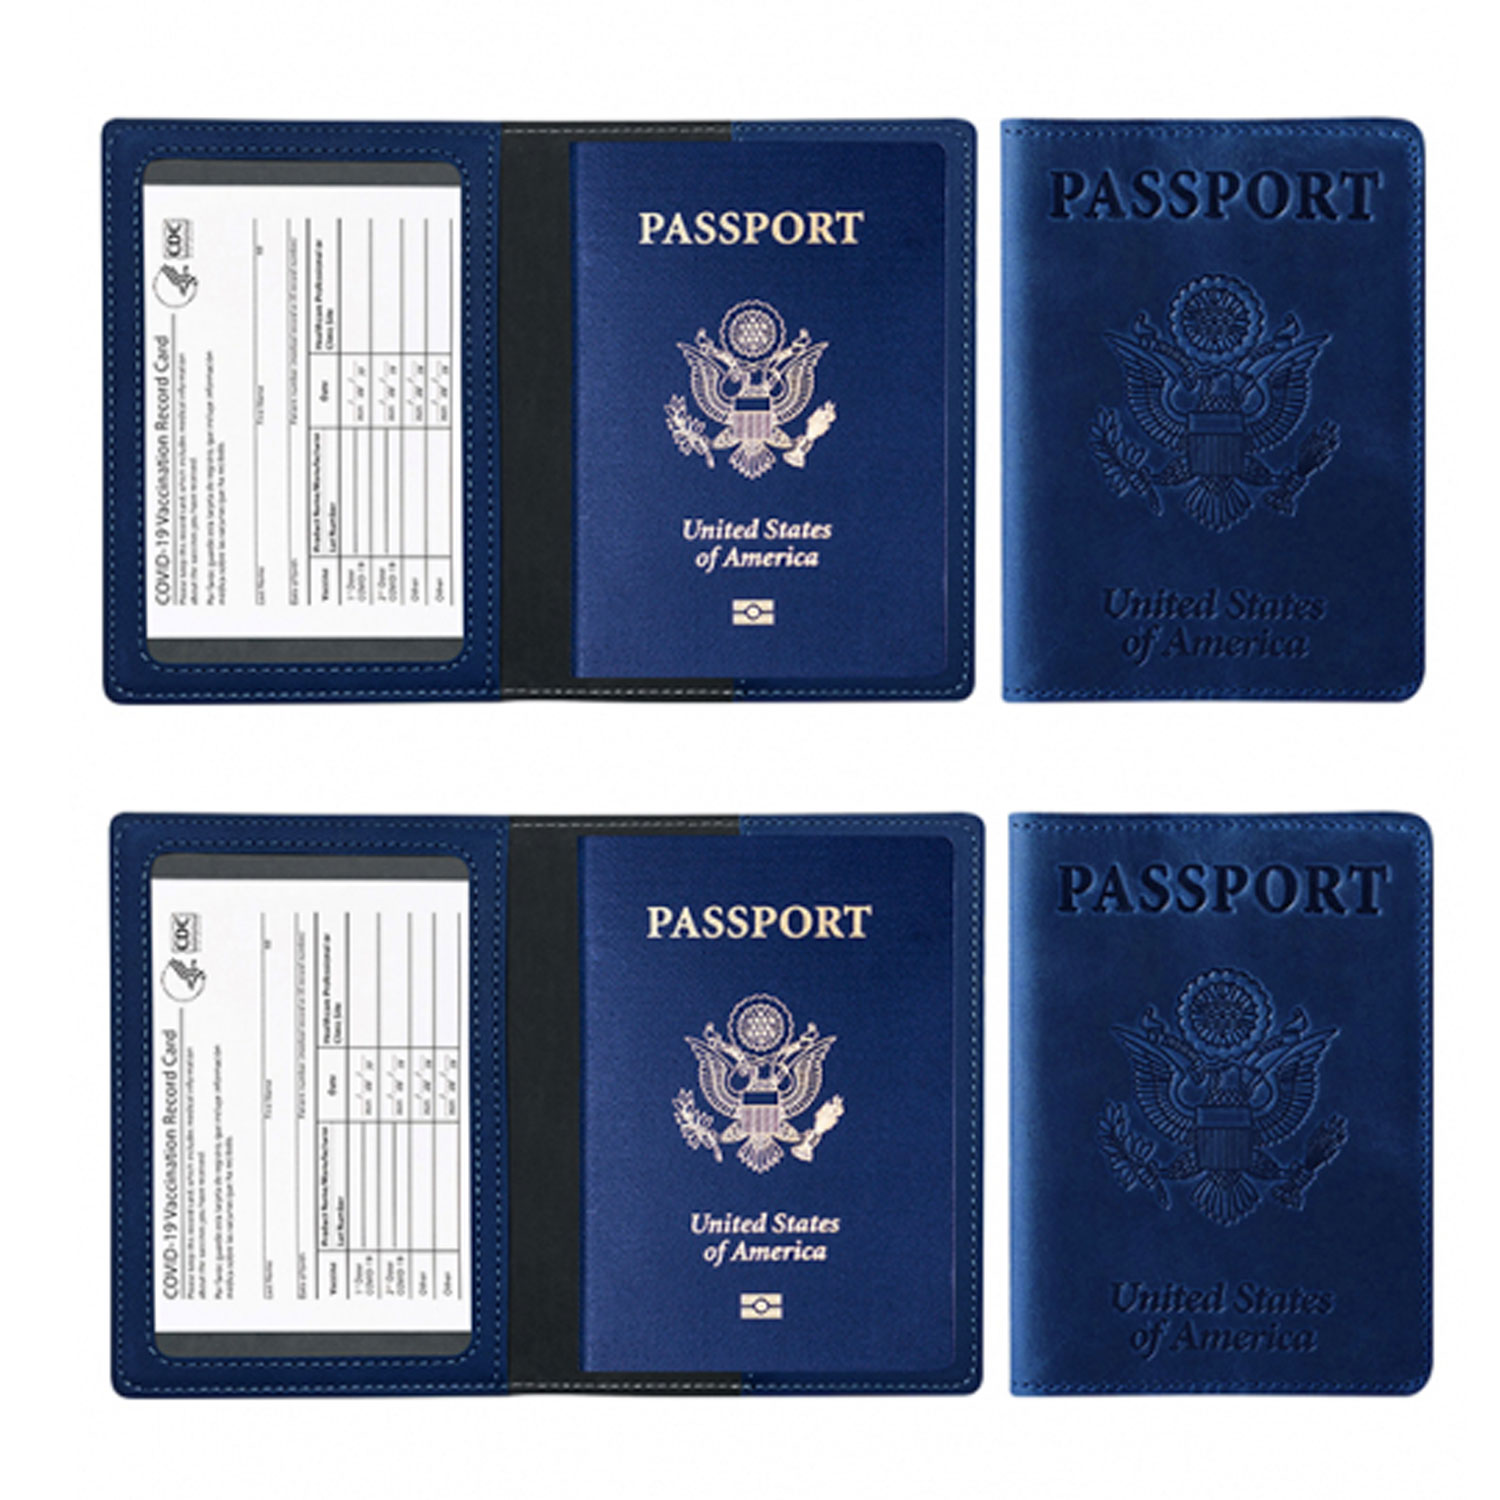 Passport Holder With CDC Vaccination Card Protector 2 Pack